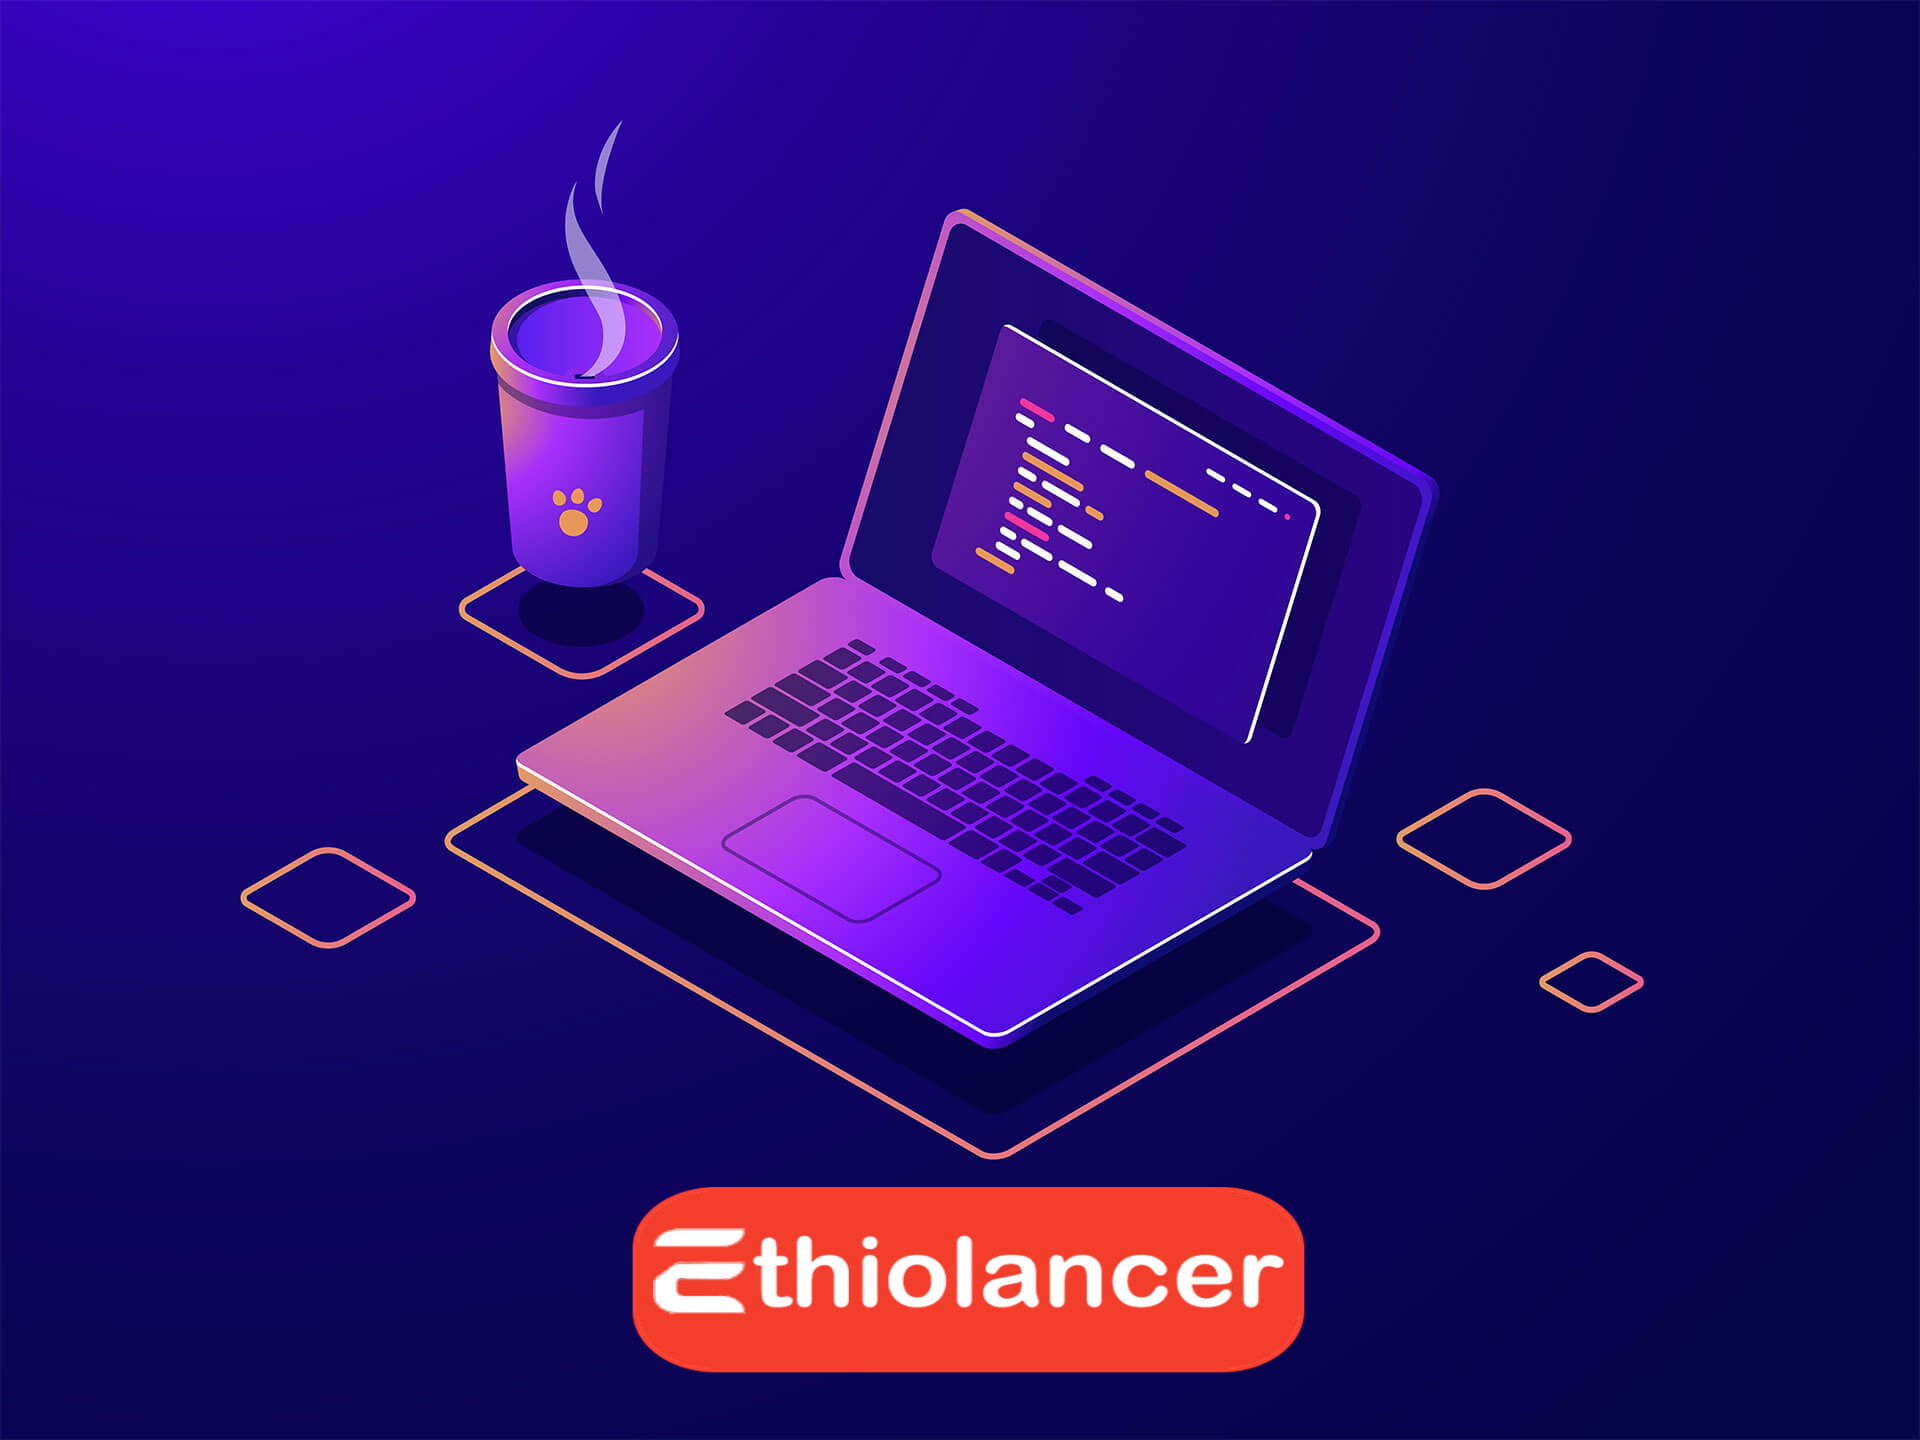 Use The EthioLancer, to Earn Business